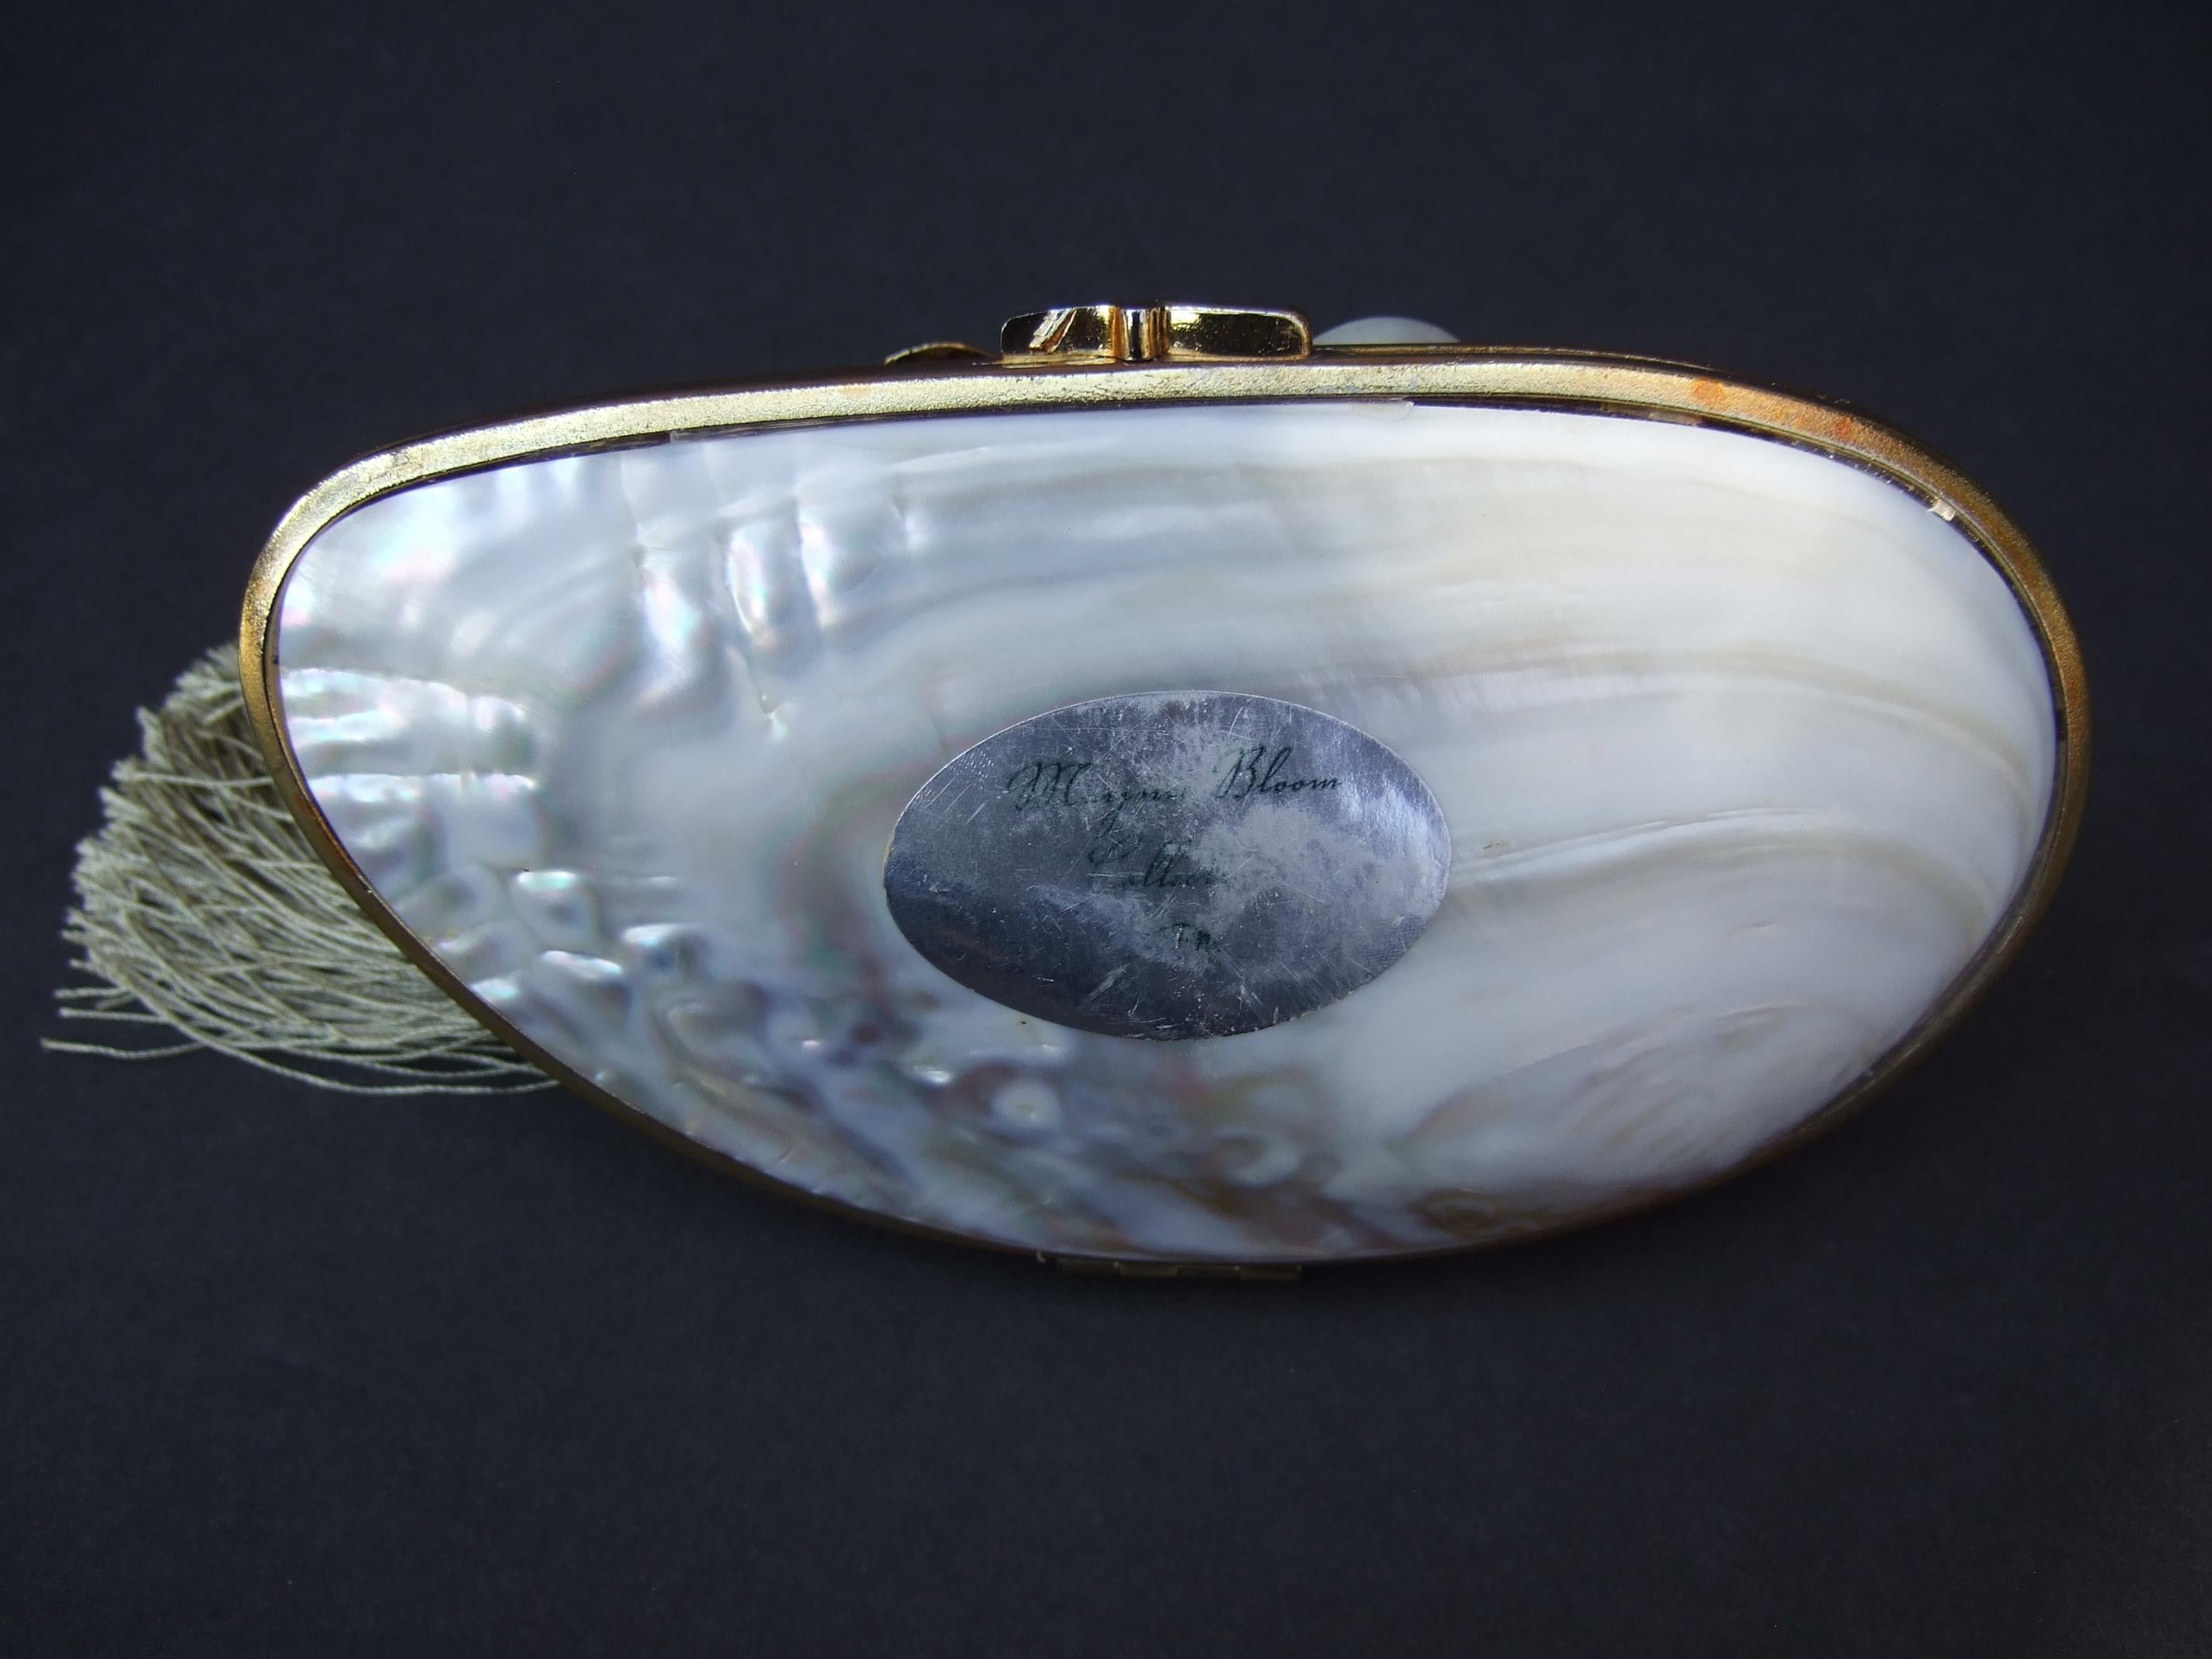 Opulent Mother of Pearl Crystal Lizard Encrusted Artisan Clutch c 1970s For Sale 9